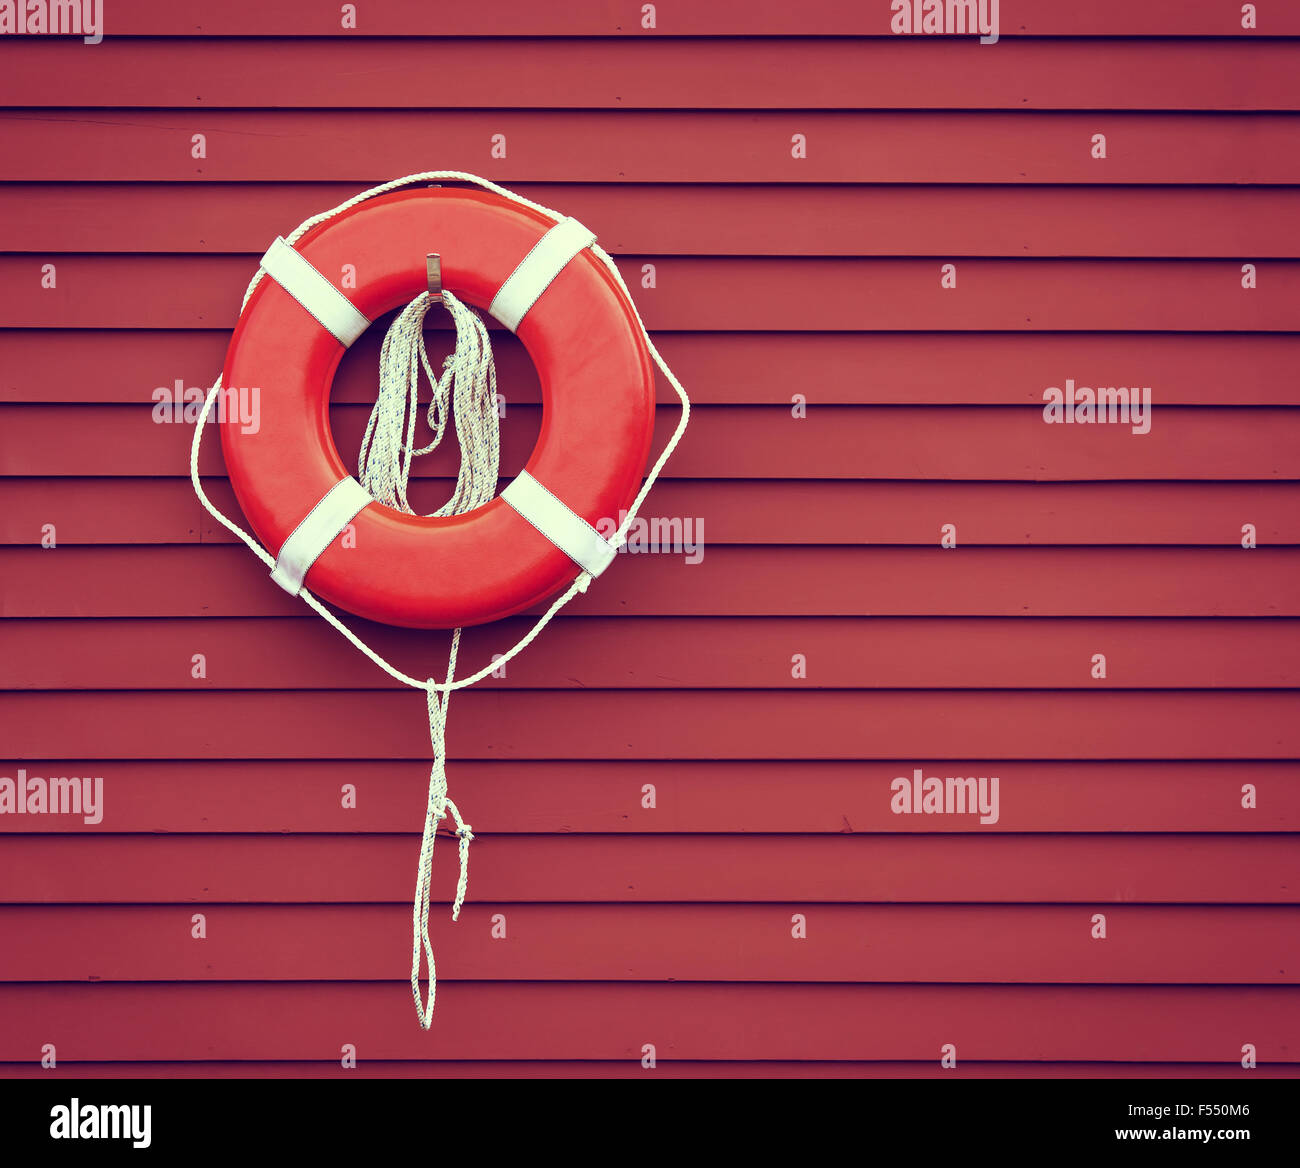 Ring buoy hanging against red, wooden wall background Stock Photo